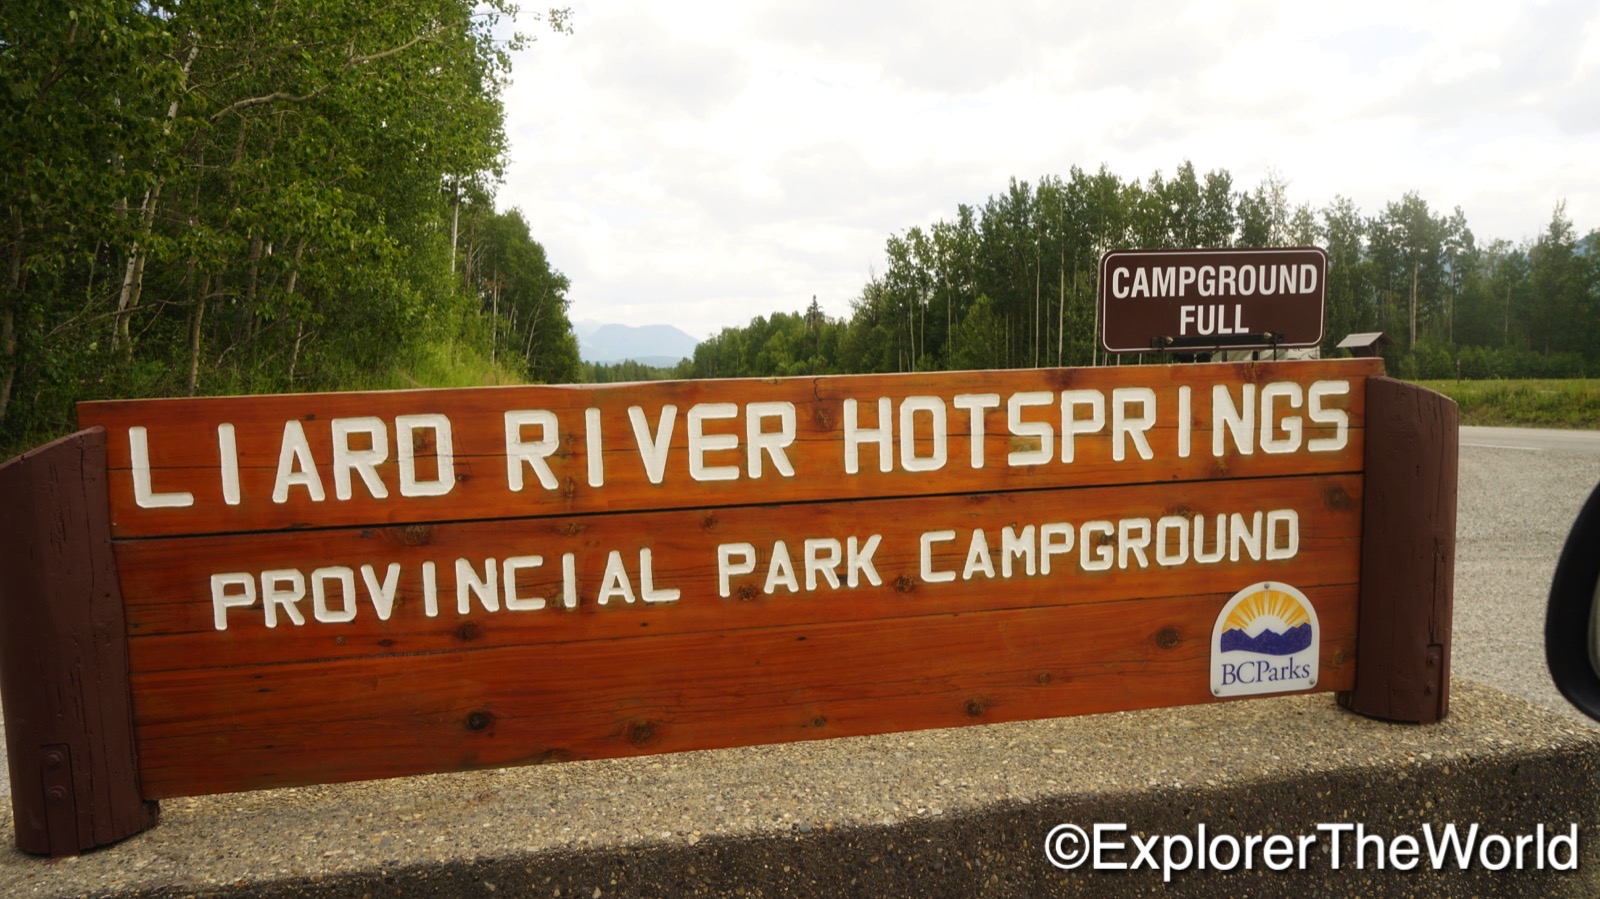 Liard River Hotspings00001